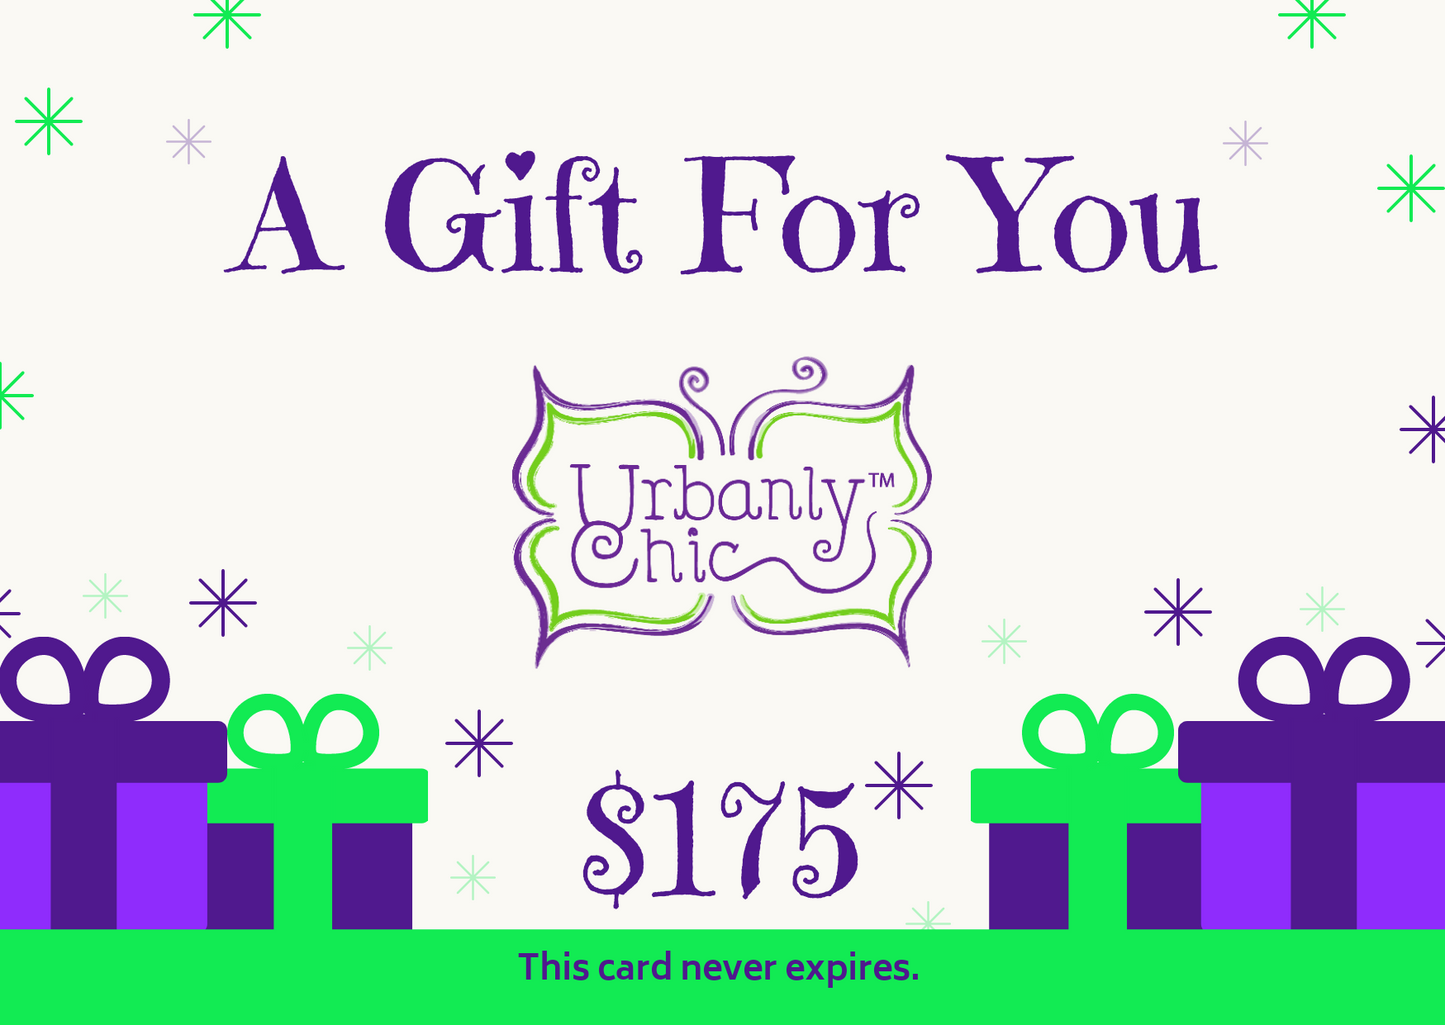 Urbanly Chic Gift Card